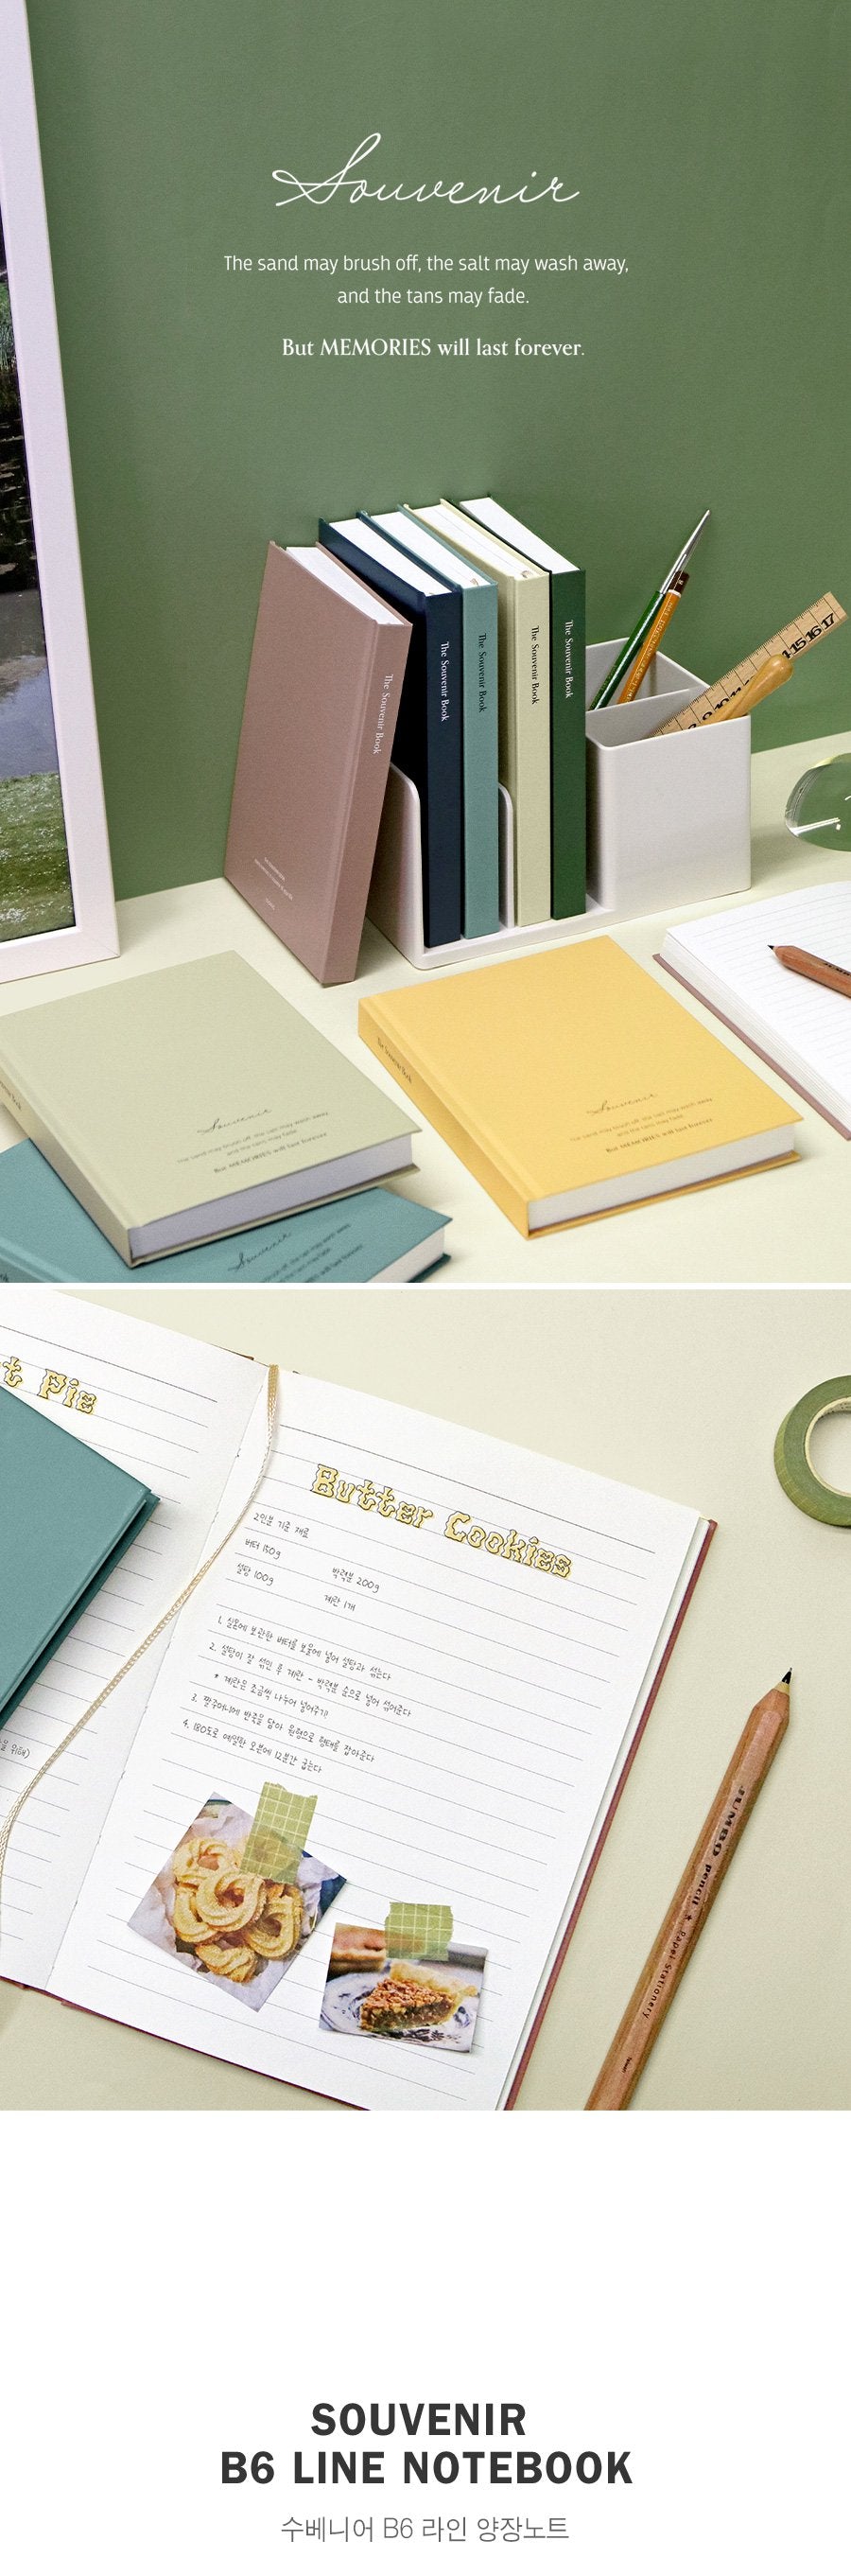 Souvenir Hardcover Notebook Iconic 8 Planner, Journal, Diary Hunter & The Scholar